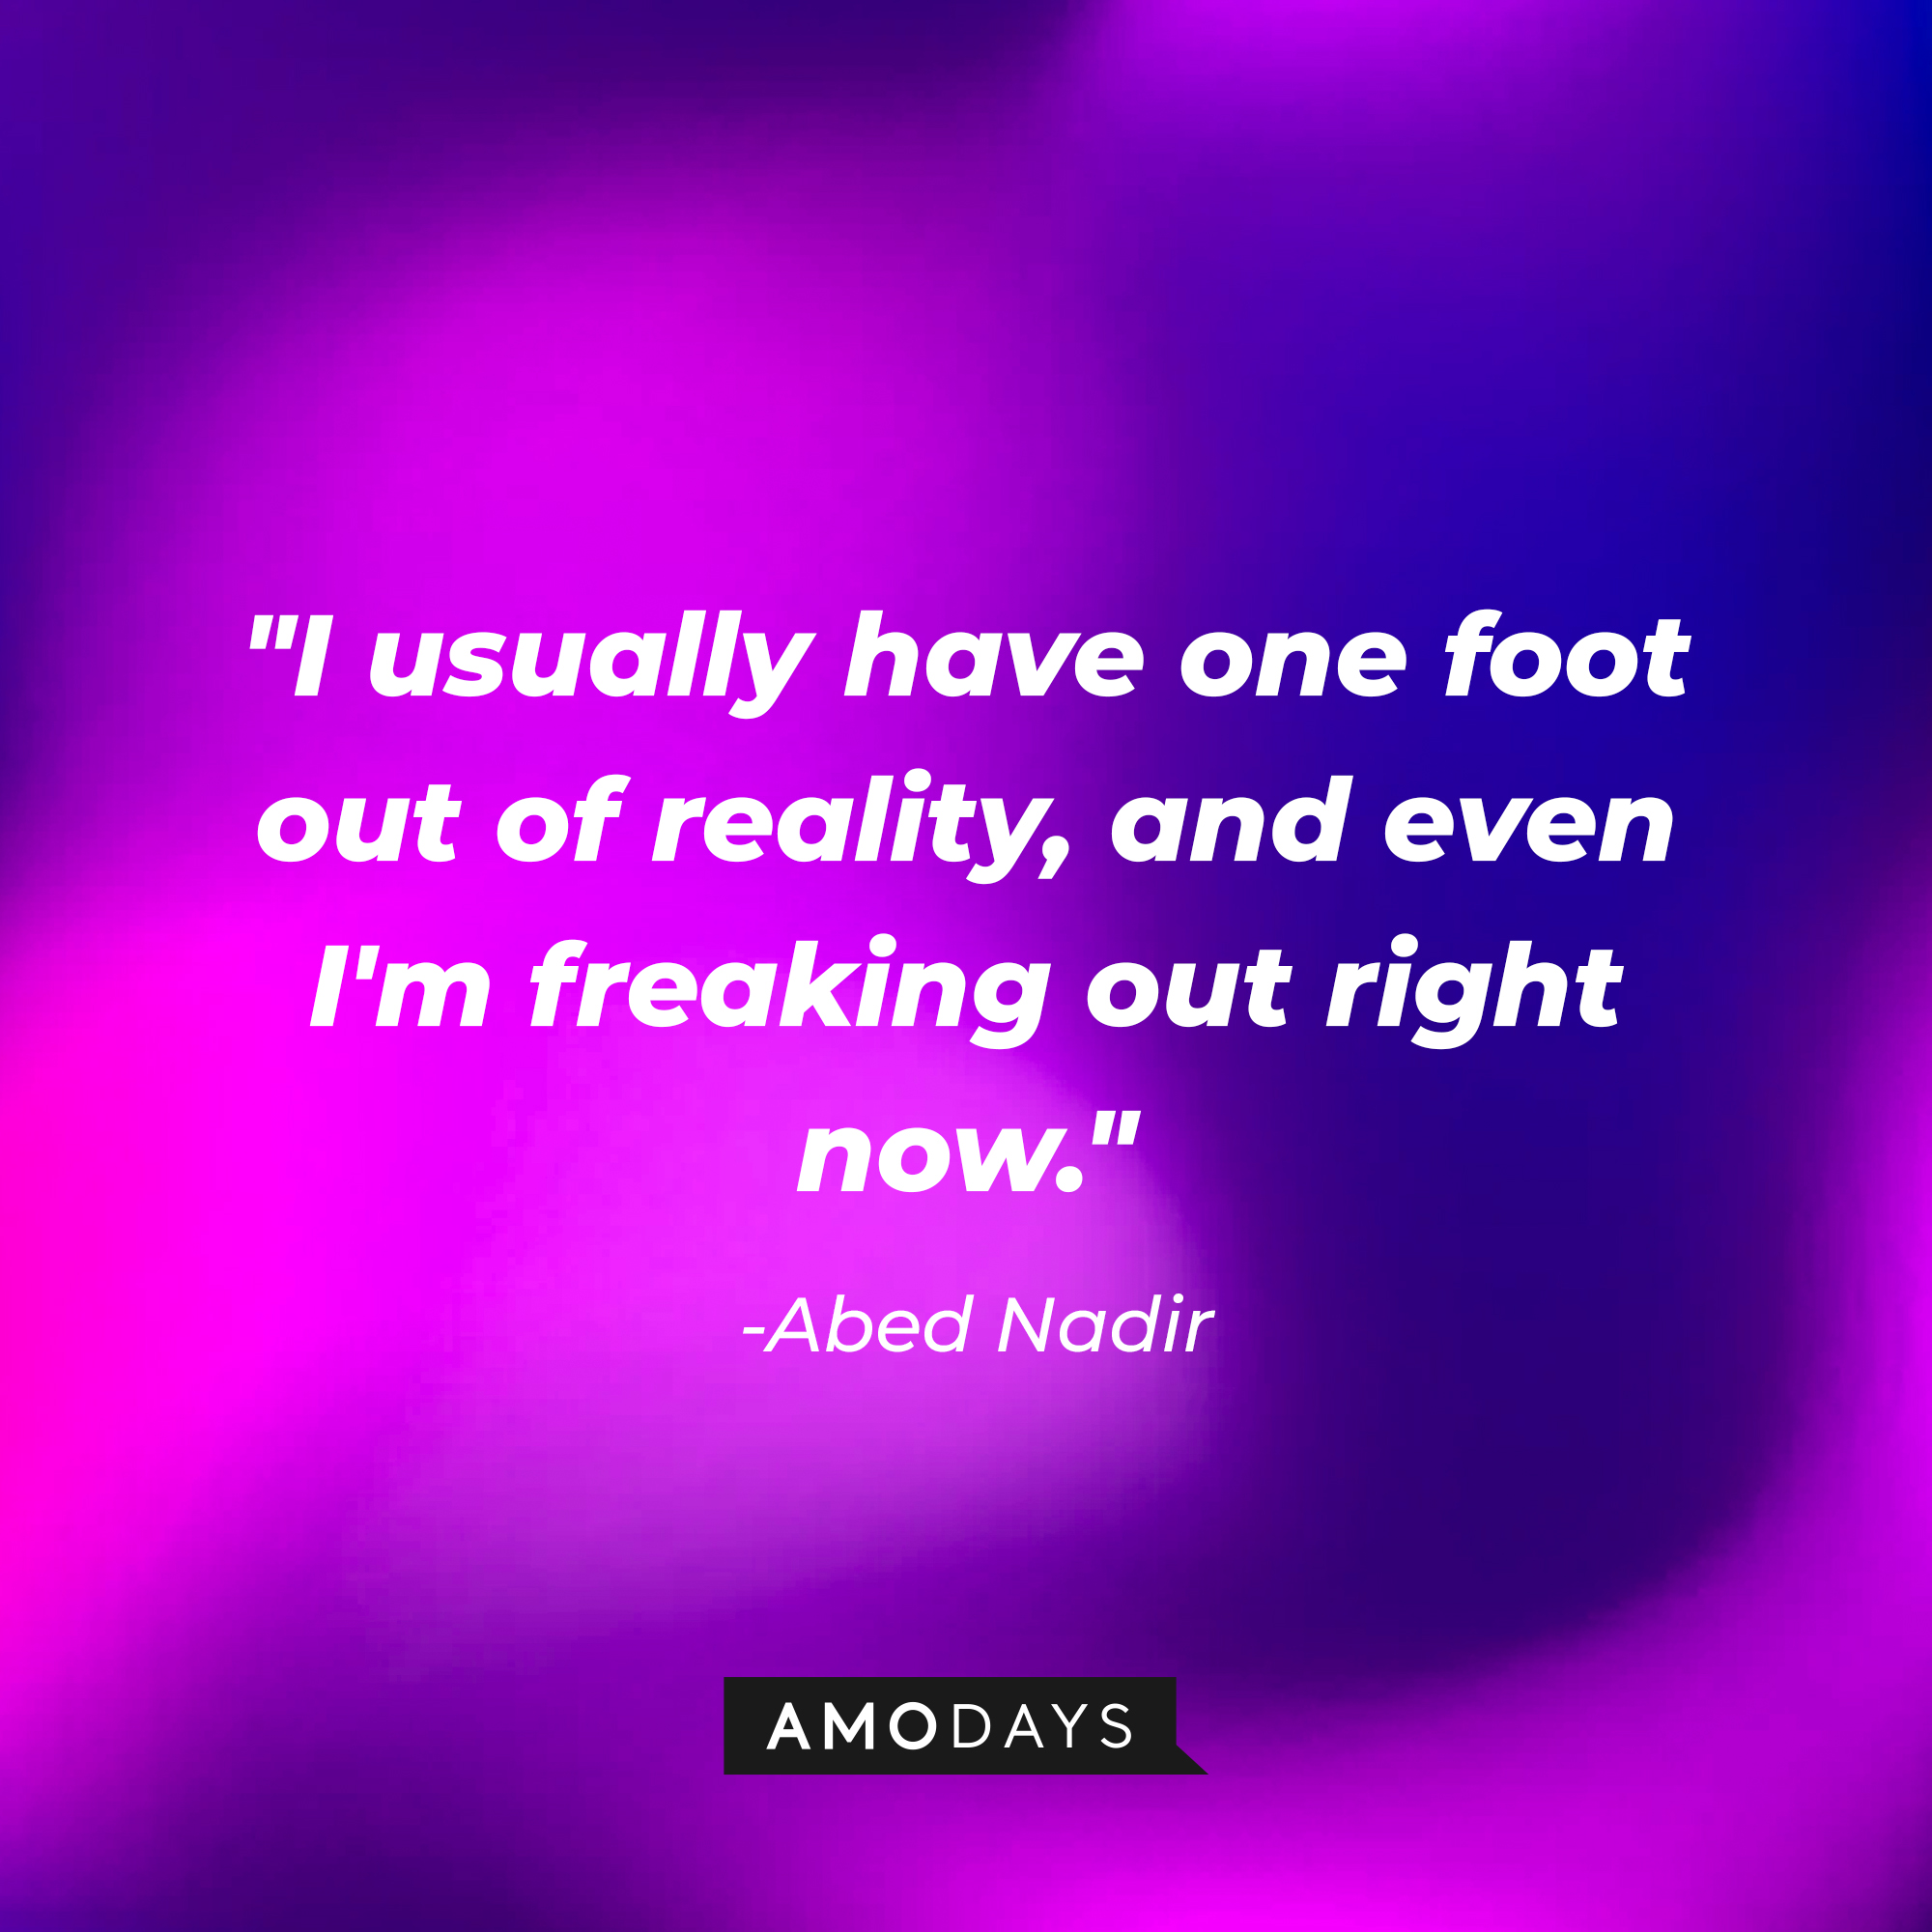 Abed Nadir’s quote: "I usually have one foot out of reality, and even I'm freaking out right now." | Source: AmoDay